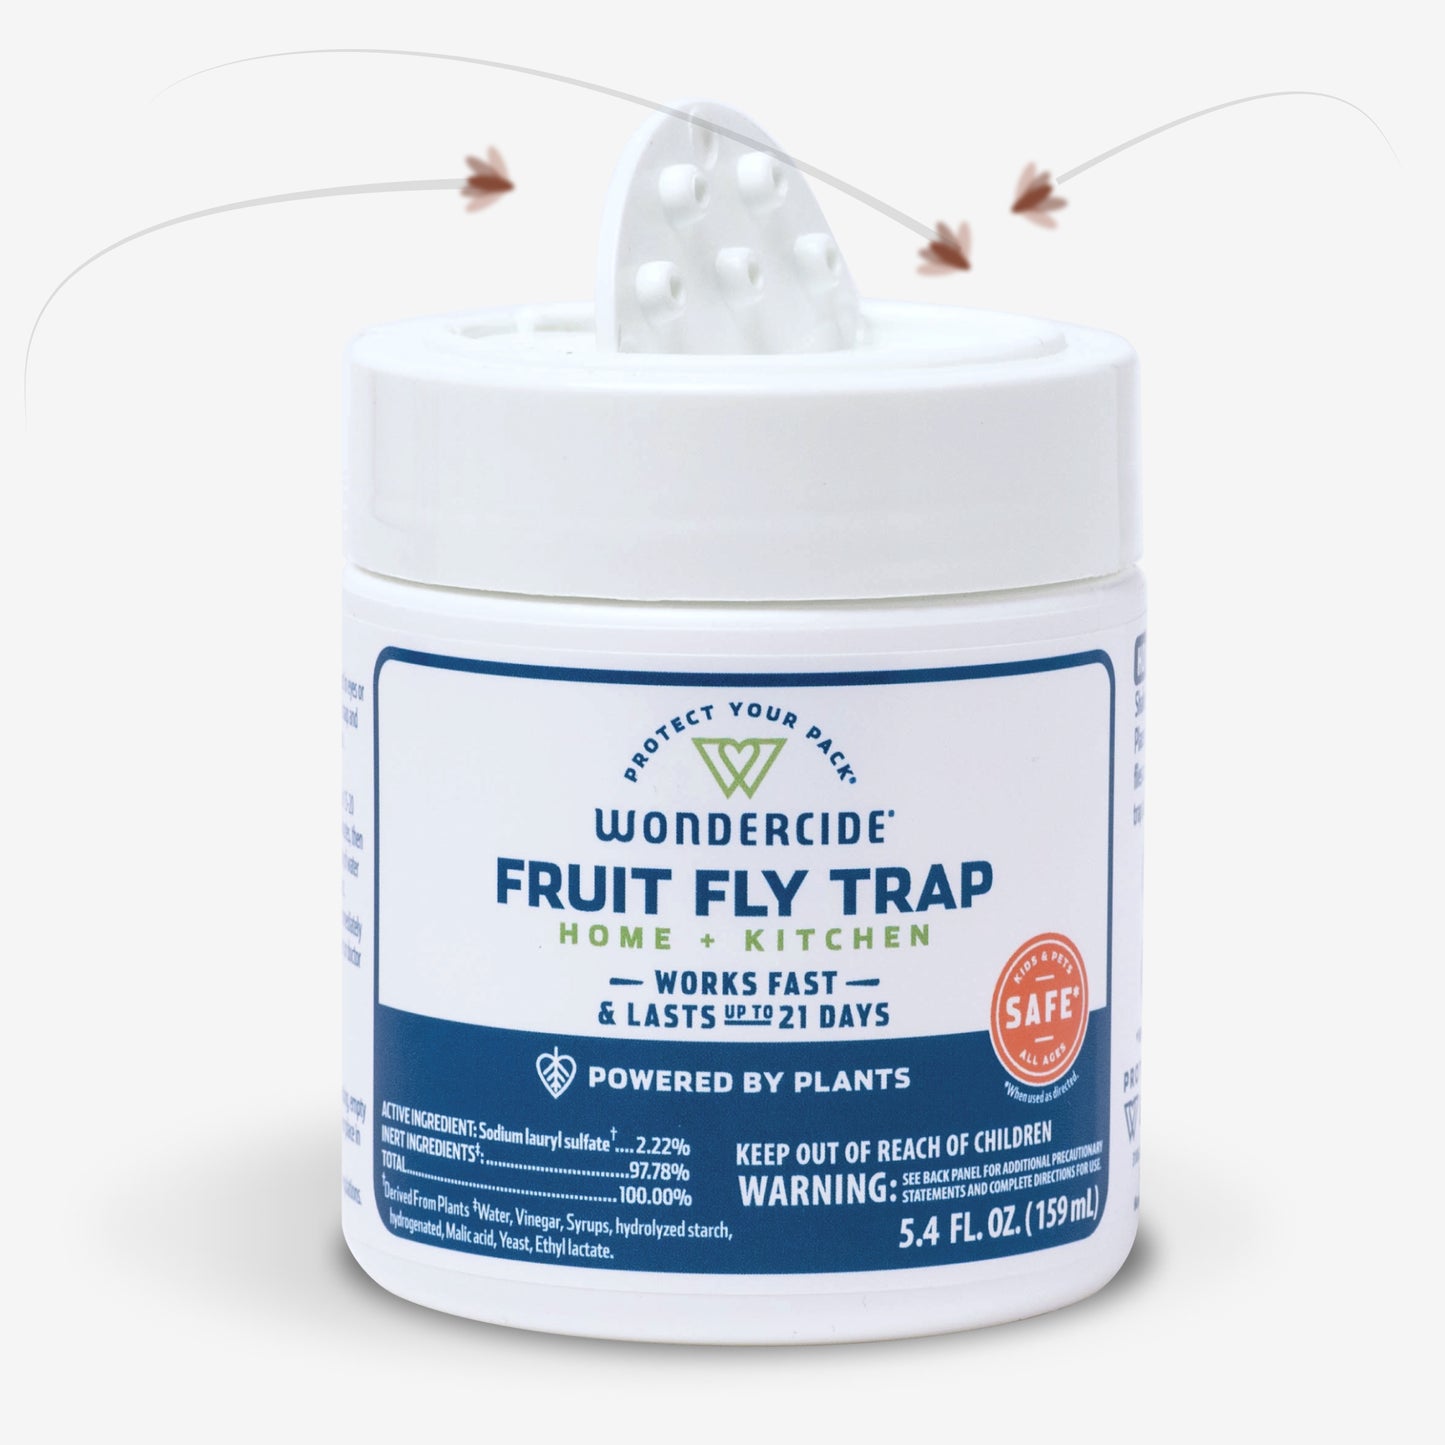 Wondercide Fruit Fly Trap is plant-powered, proven to work, and a snap